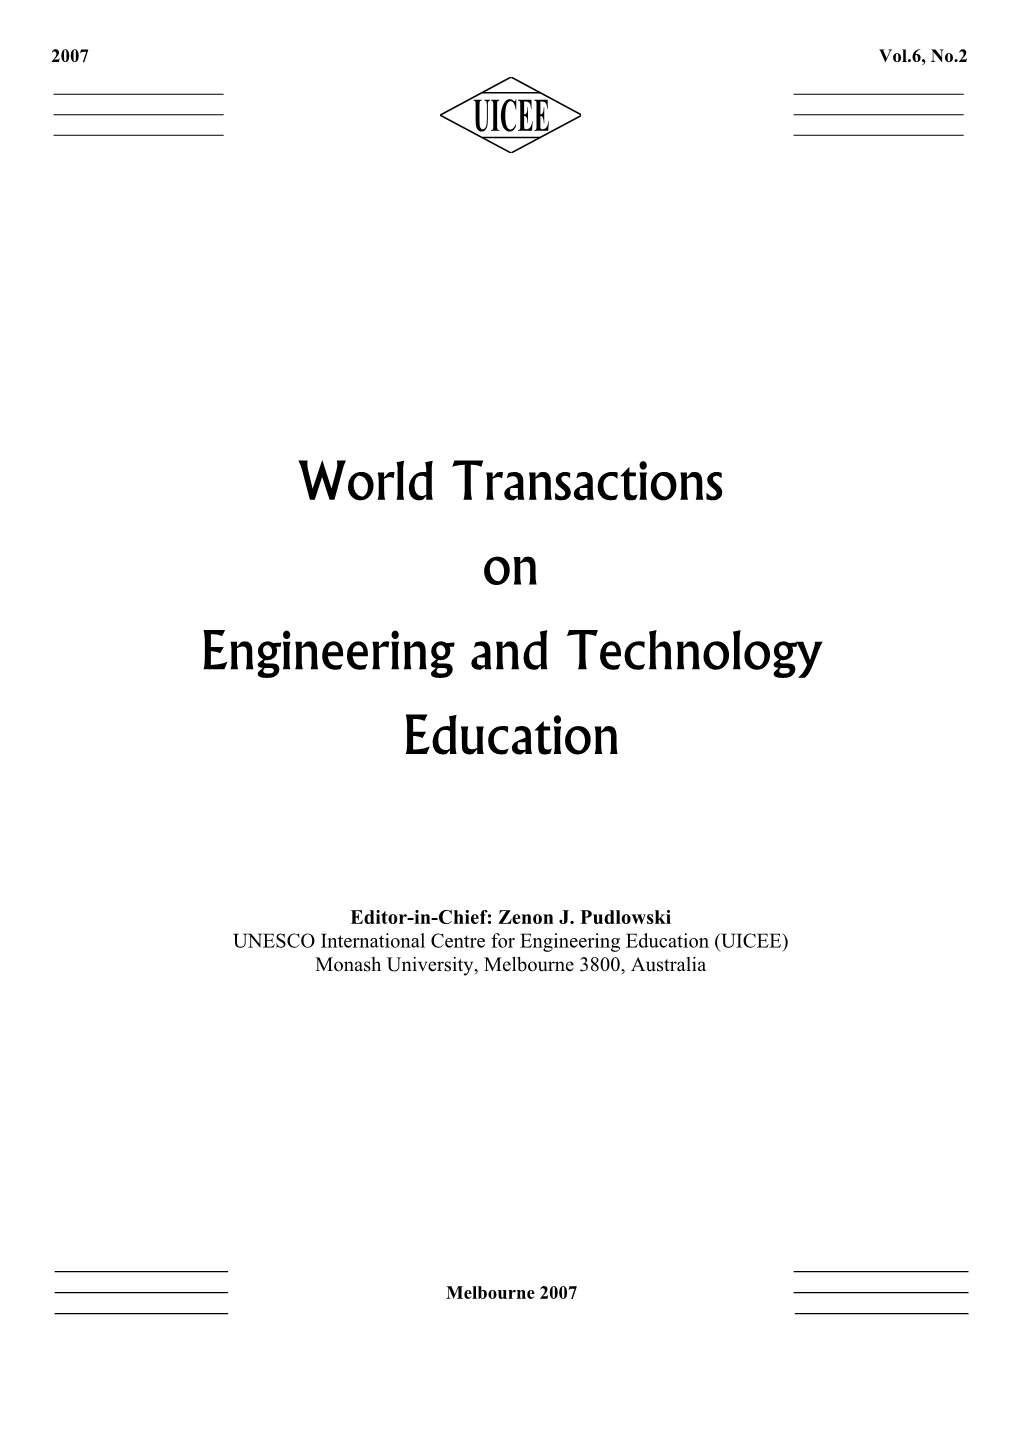 World Transactions on Engineering and Technology Education